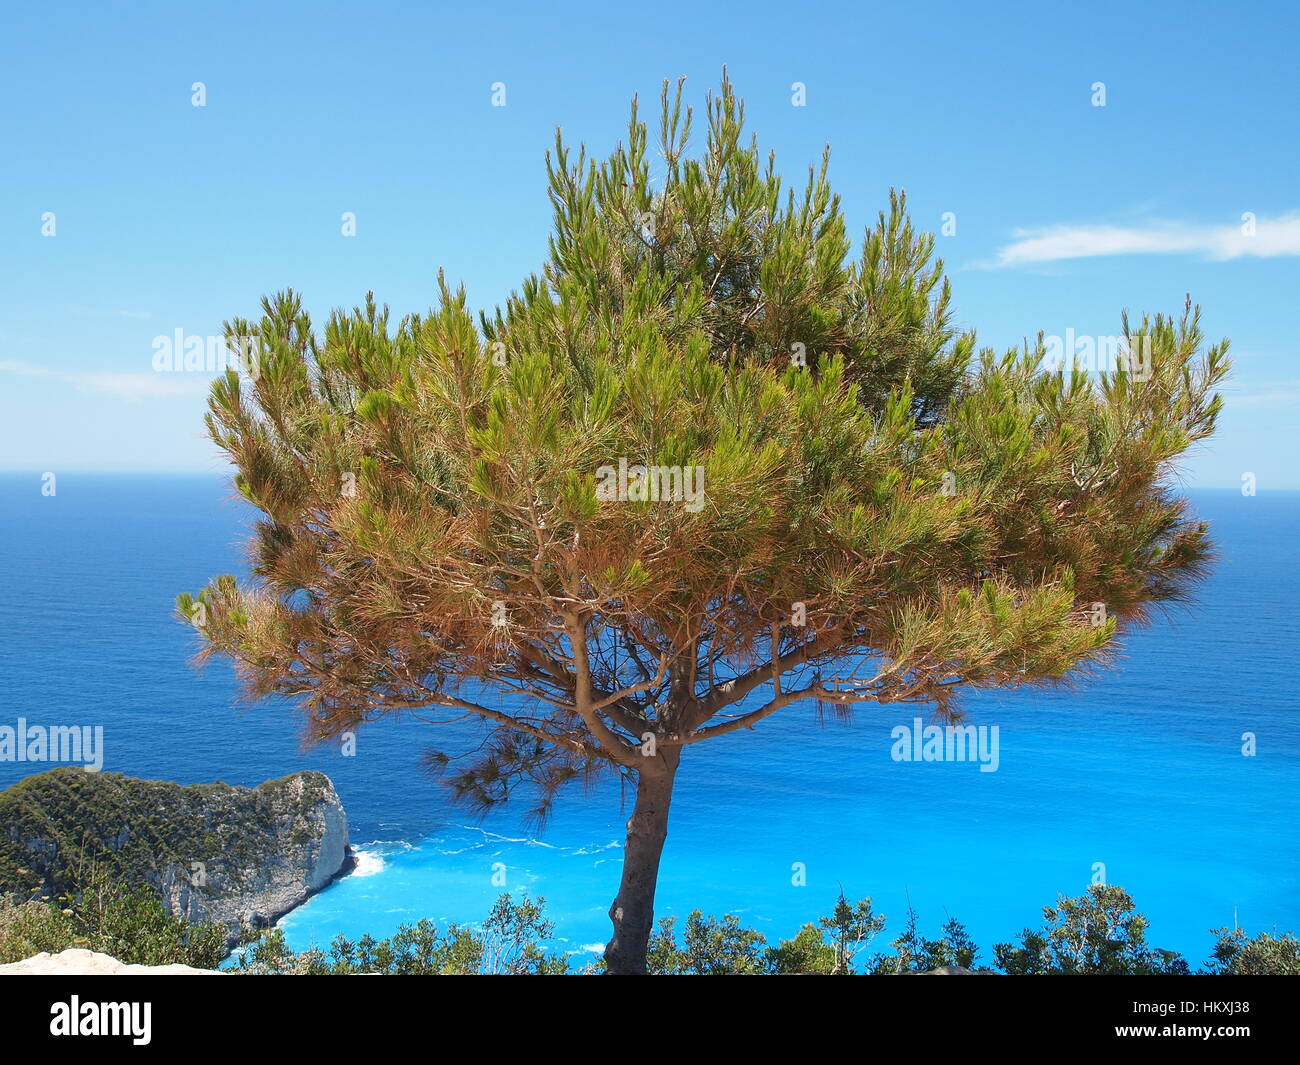 Pine tree is evergreen, coniferous resinous tree. The bark of most pines is thick and scaly, but some species have thin, flaky bark. Stock Photo